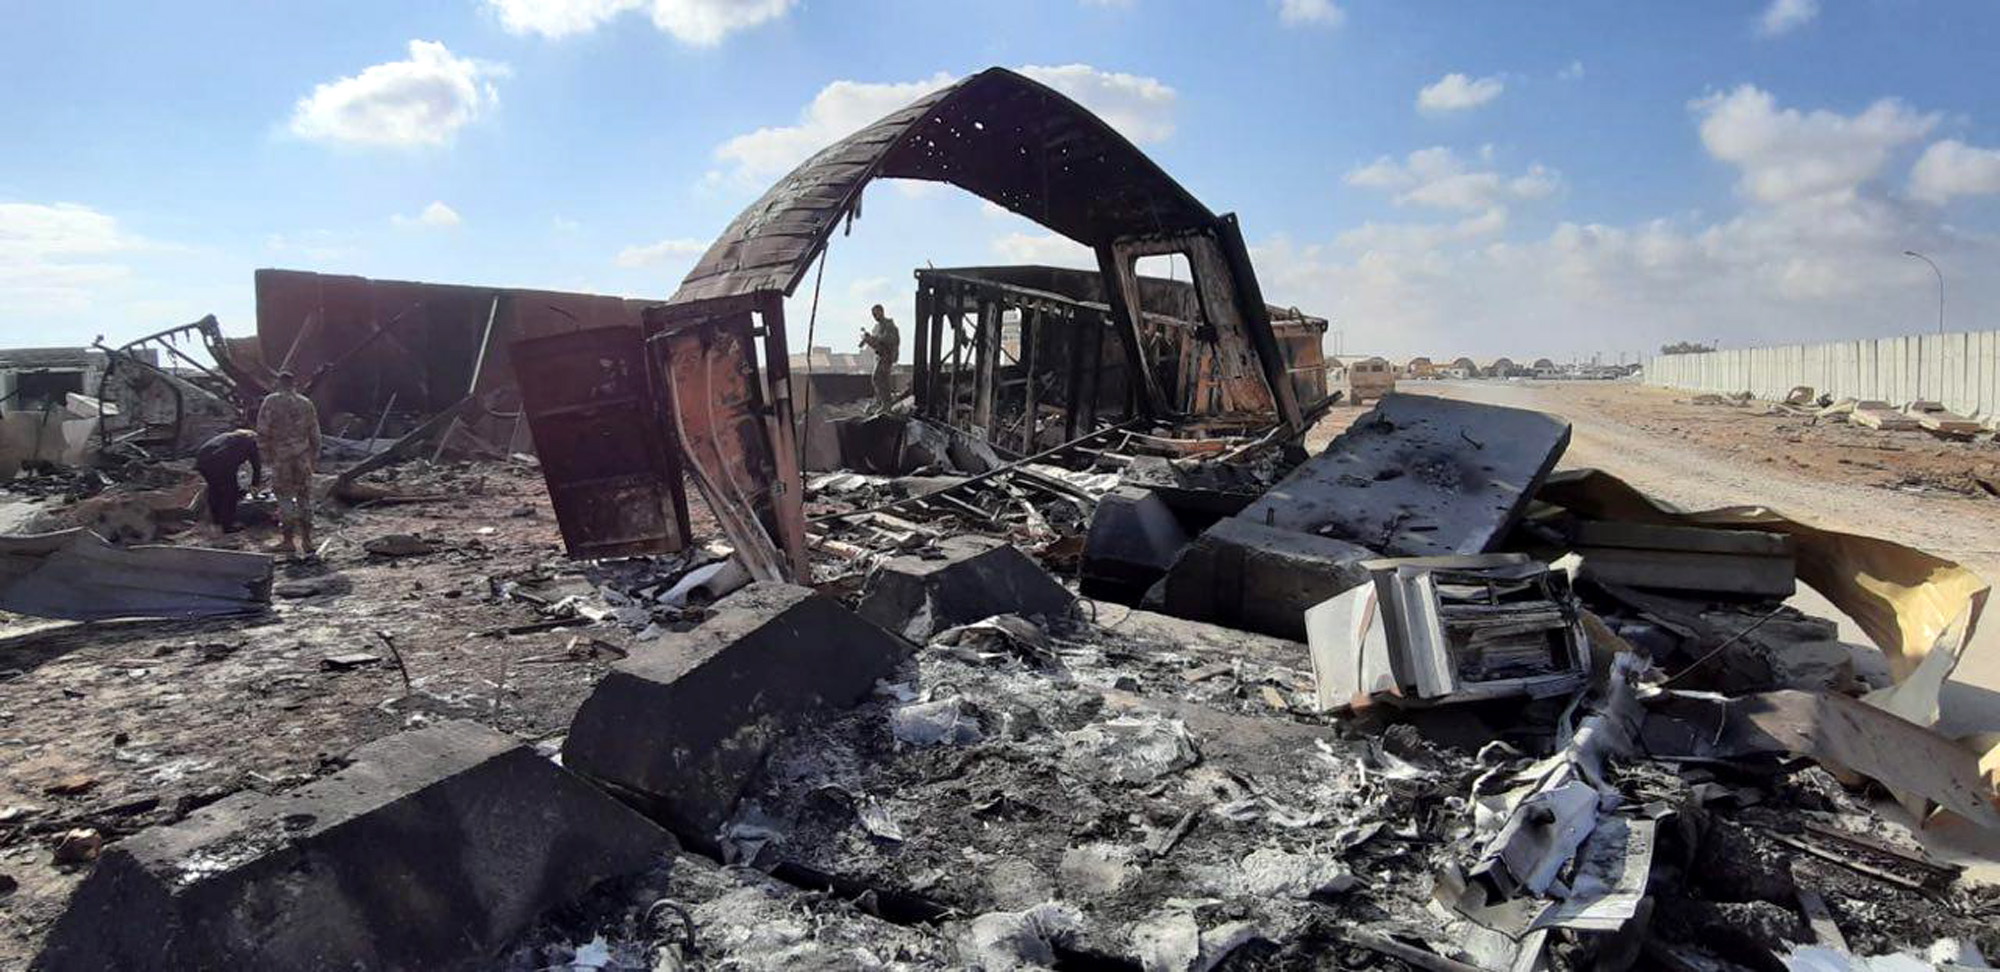 epa08127720 US soldiers stand next the damage that caused by the Iran's missiles attack inside Ain al-Assad air base in Anbar province, Iraq, 14 January 2020. Iran's Revolutionary Guard Crops (IRGC) launched a series of rockets targeting Ain al-Assad air base located in al-Anbar on 08 January 2020, one of the bases hosting US military troops in Iraq. The attack comes days after the Top Iranian General Qasem Soleimani, head of the IRGC's Quds force, was killed by a US drone strike in Baghdad.  EPA/STR